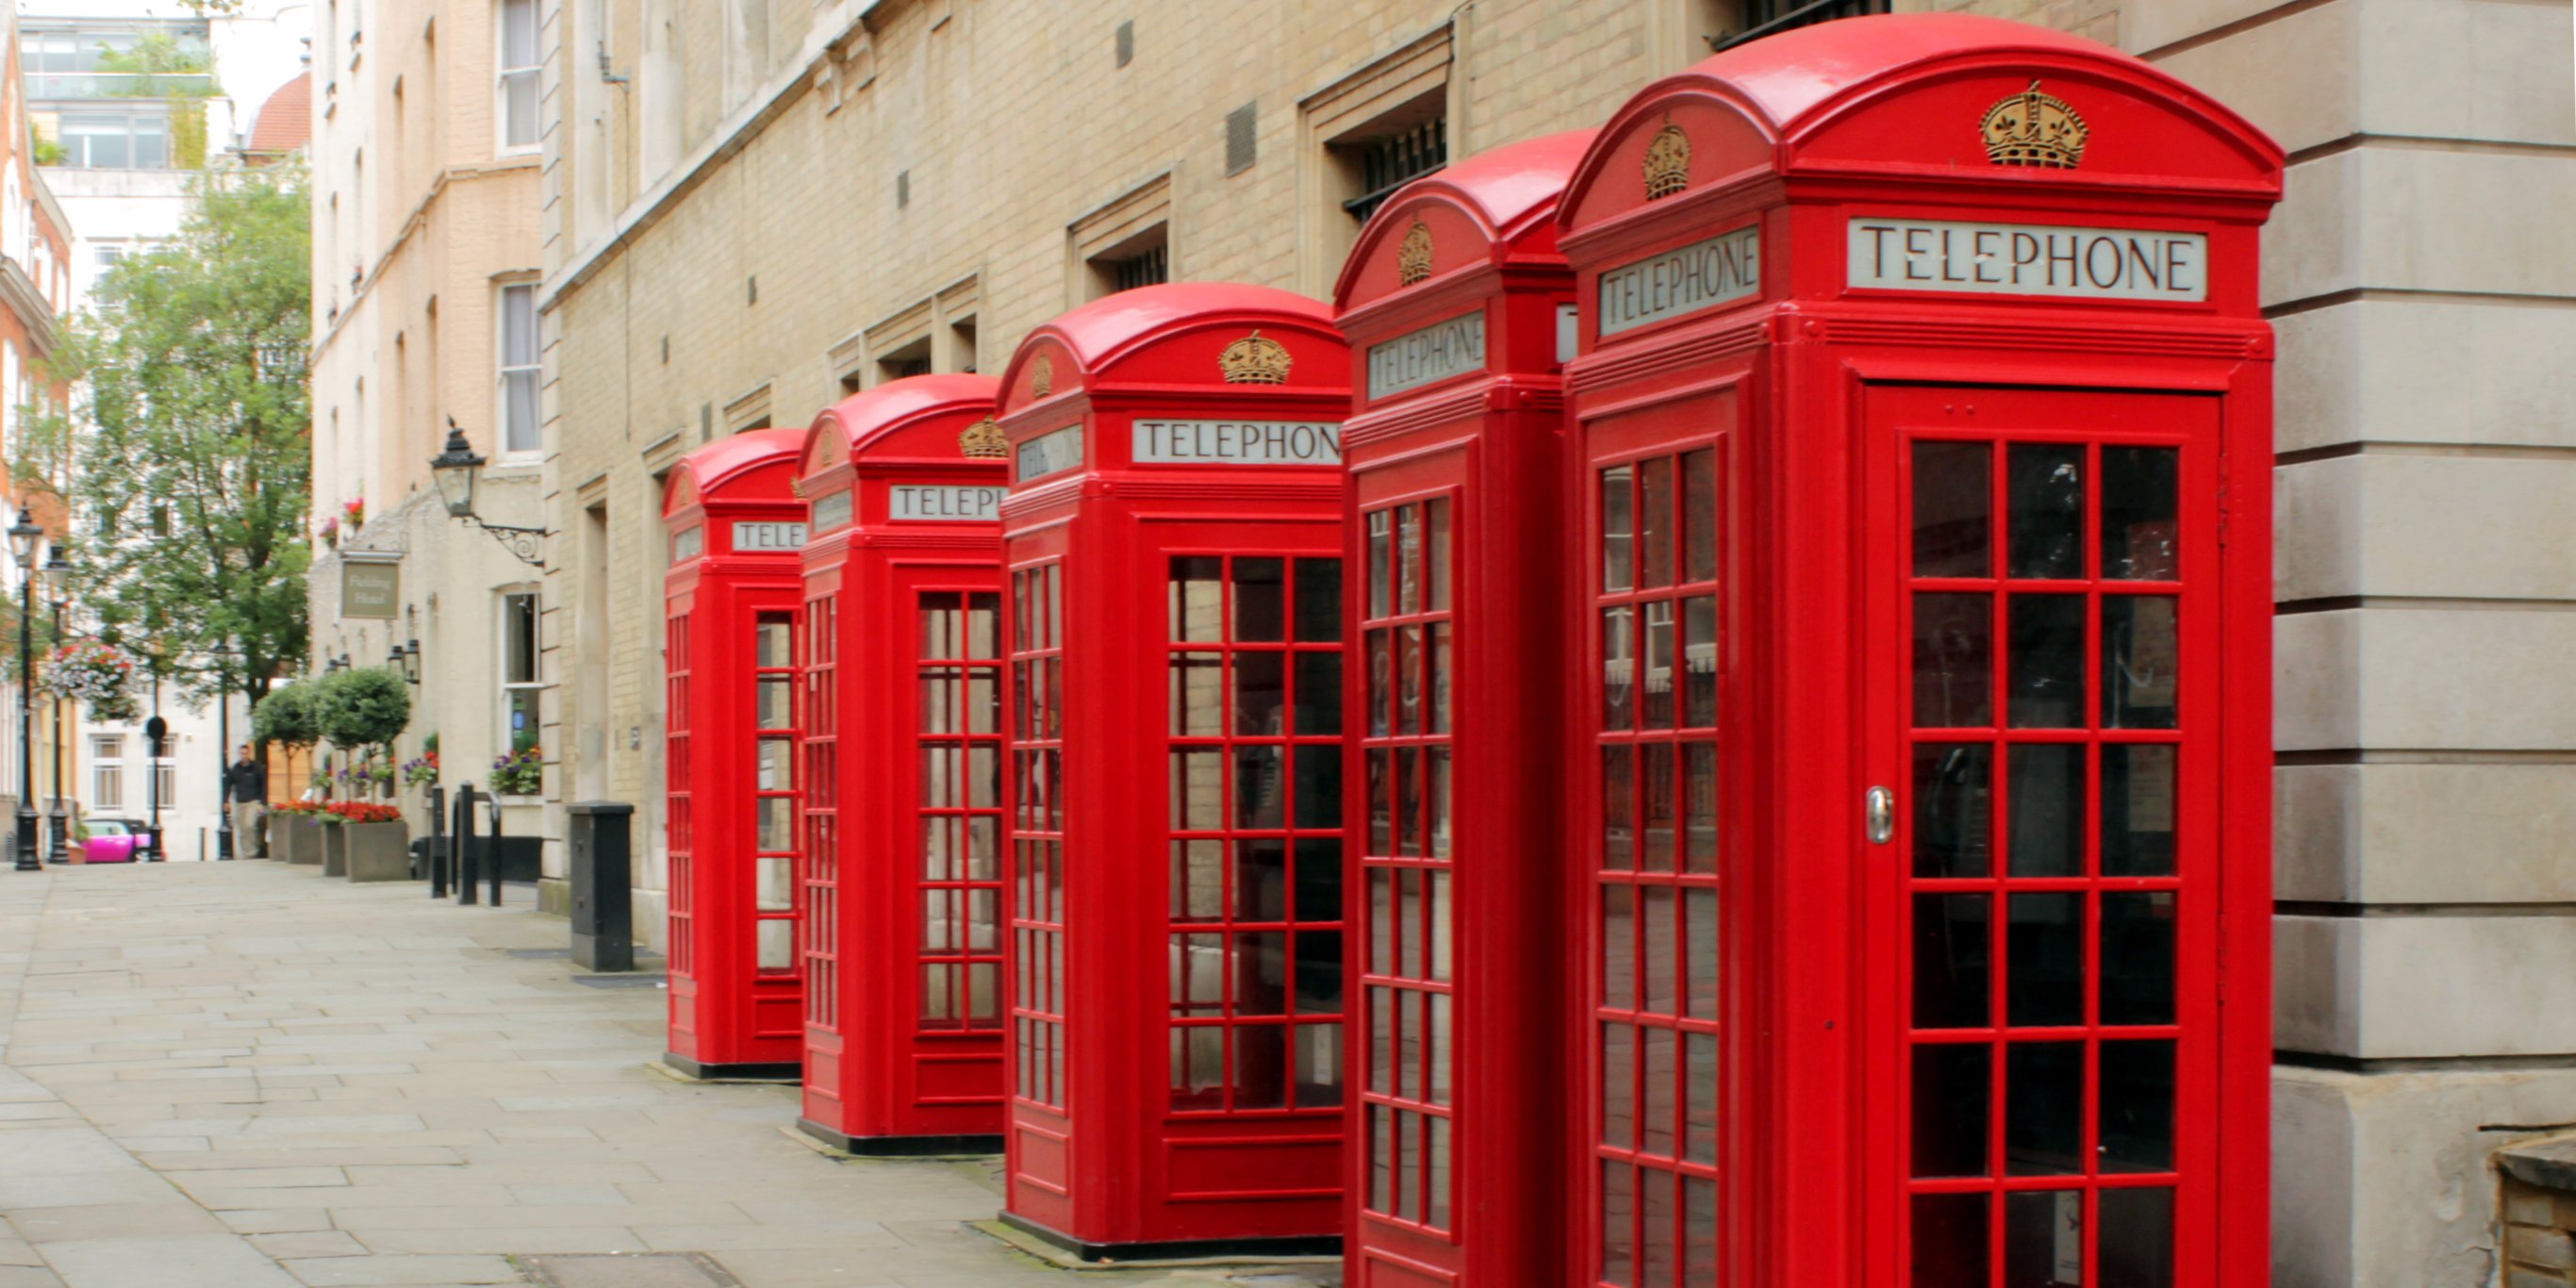 London's telephone booths are being transformed into offices ...